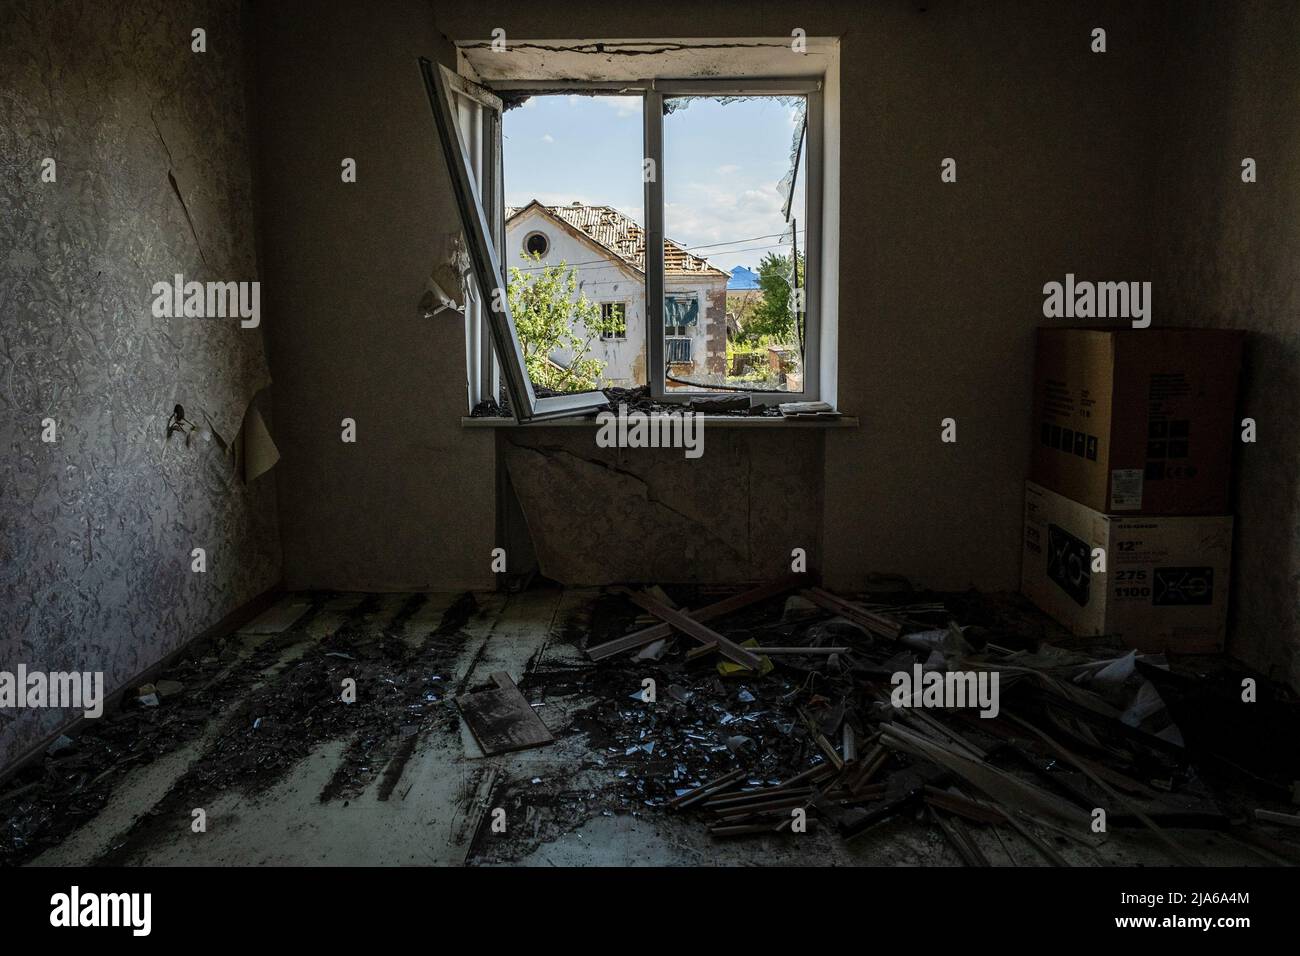 Bakhmut, Ukraine. 24th May, 2022. A view from a room of a residential building destroyed by Russian shelling in Bakhmut, Donbas. As Bakhmut stands as a key city to Ukrainian forces in defending Donetsk(Donbas) region, the city is under attack by the Russian troops. The Russian invasion of Ukraine started on February 24, the war that has killed numerous civilians and soldiers. (Photo by Alex Chan Tsz Yuk/SOPA Images/Sipa USA) Credit: Sipa USA/Alamy Live News Stock Photo